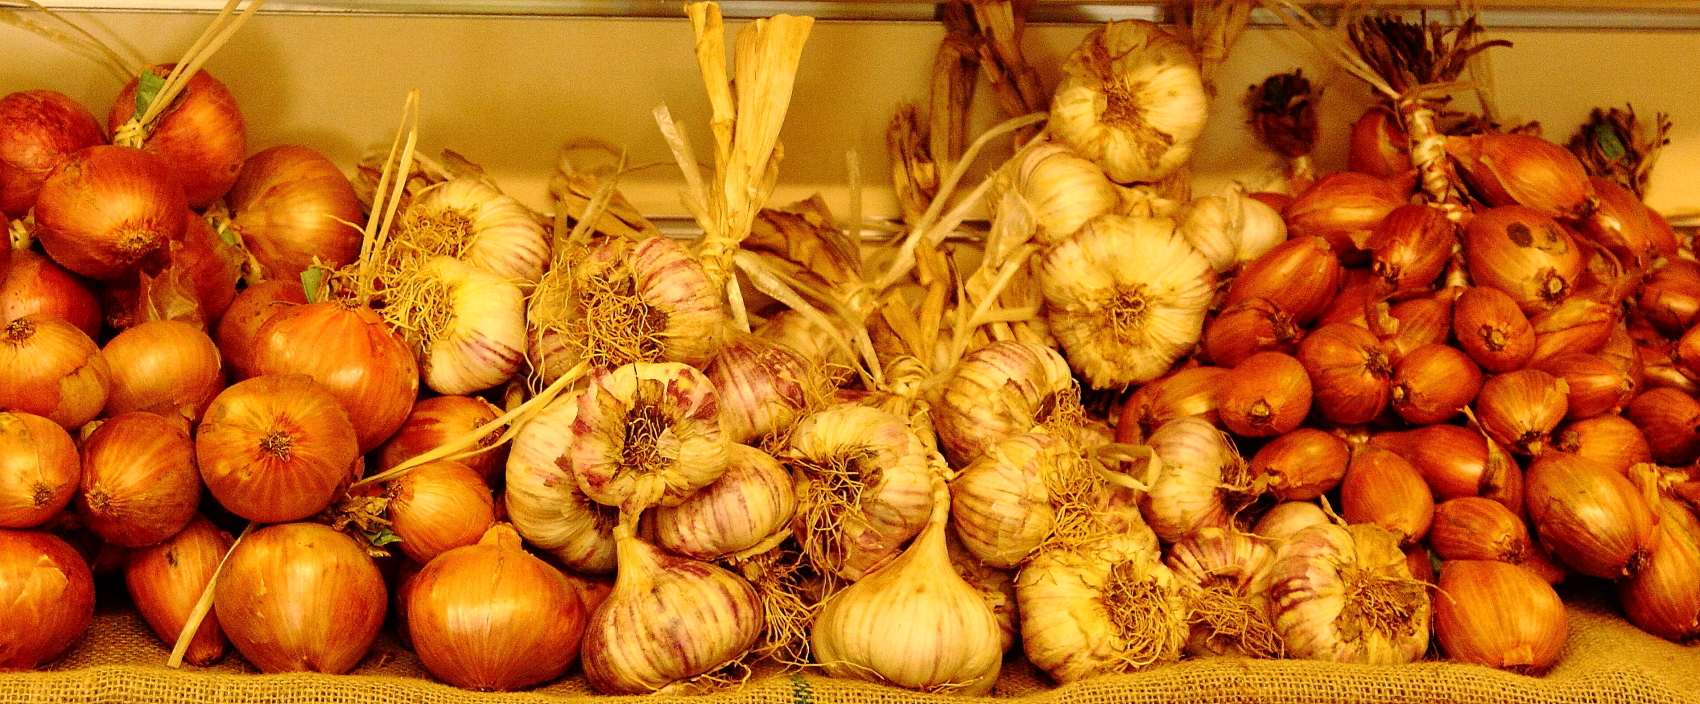 Onion, garlic & shallot strings from Brittany